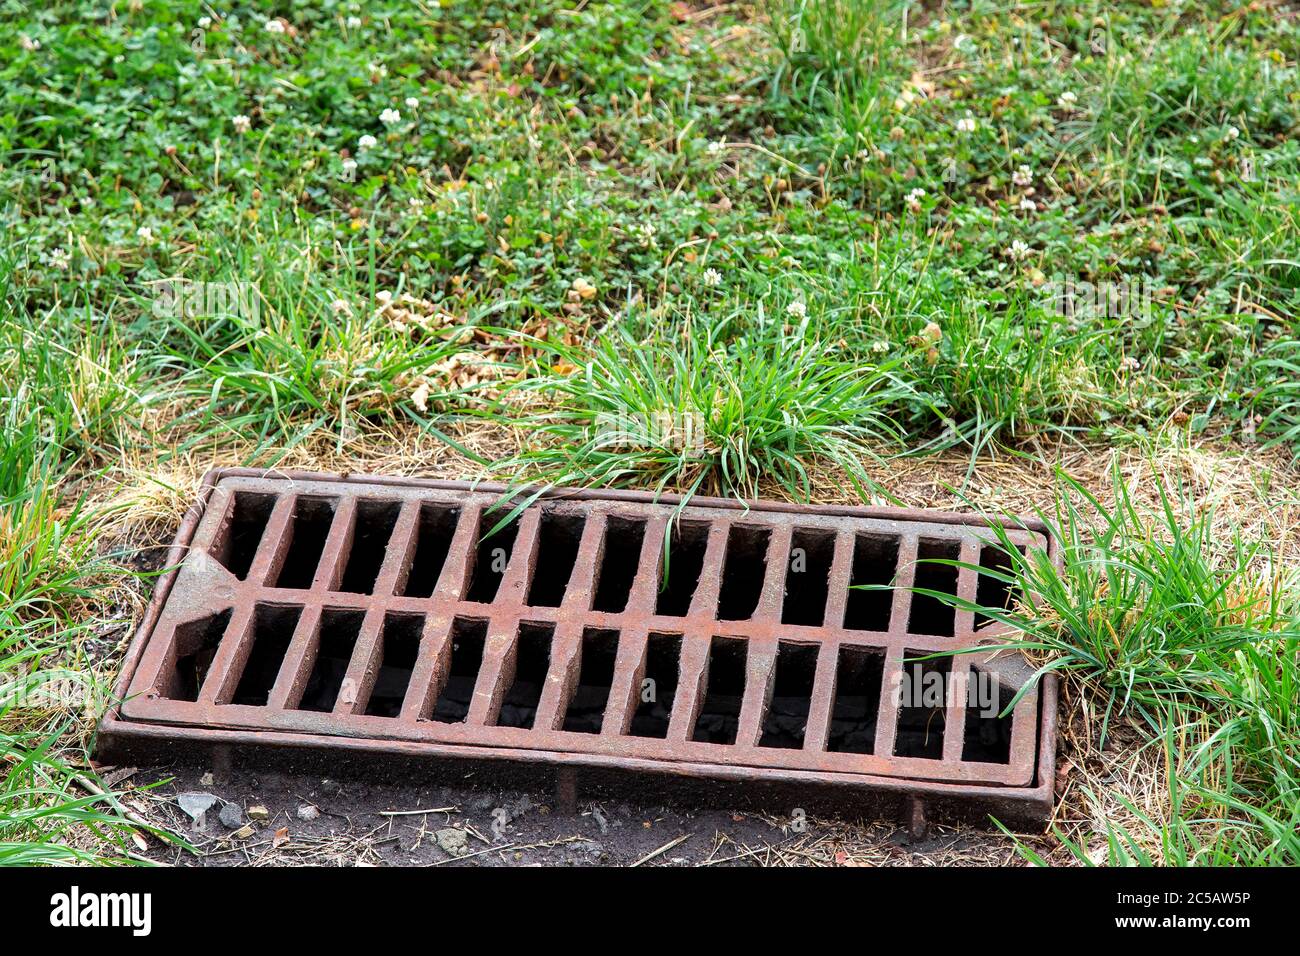 storm hatch sewage with a rusty grill overgrown with weeds in the park, close up of drainage system. Stock Photo